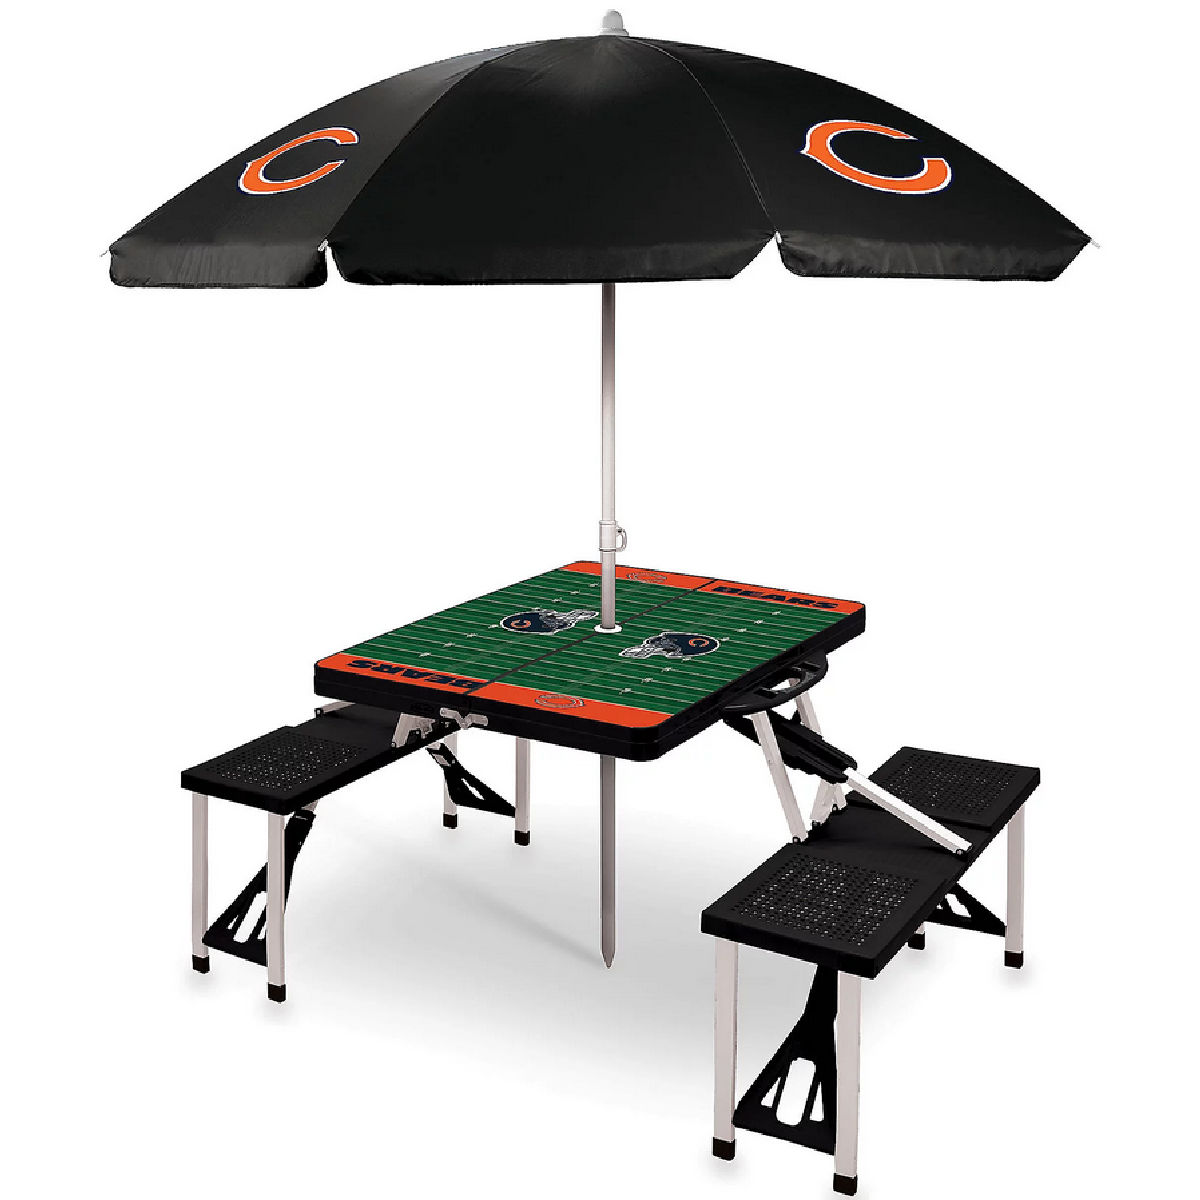 Picnic Time NFL Portable Picnic Table with Umbrella